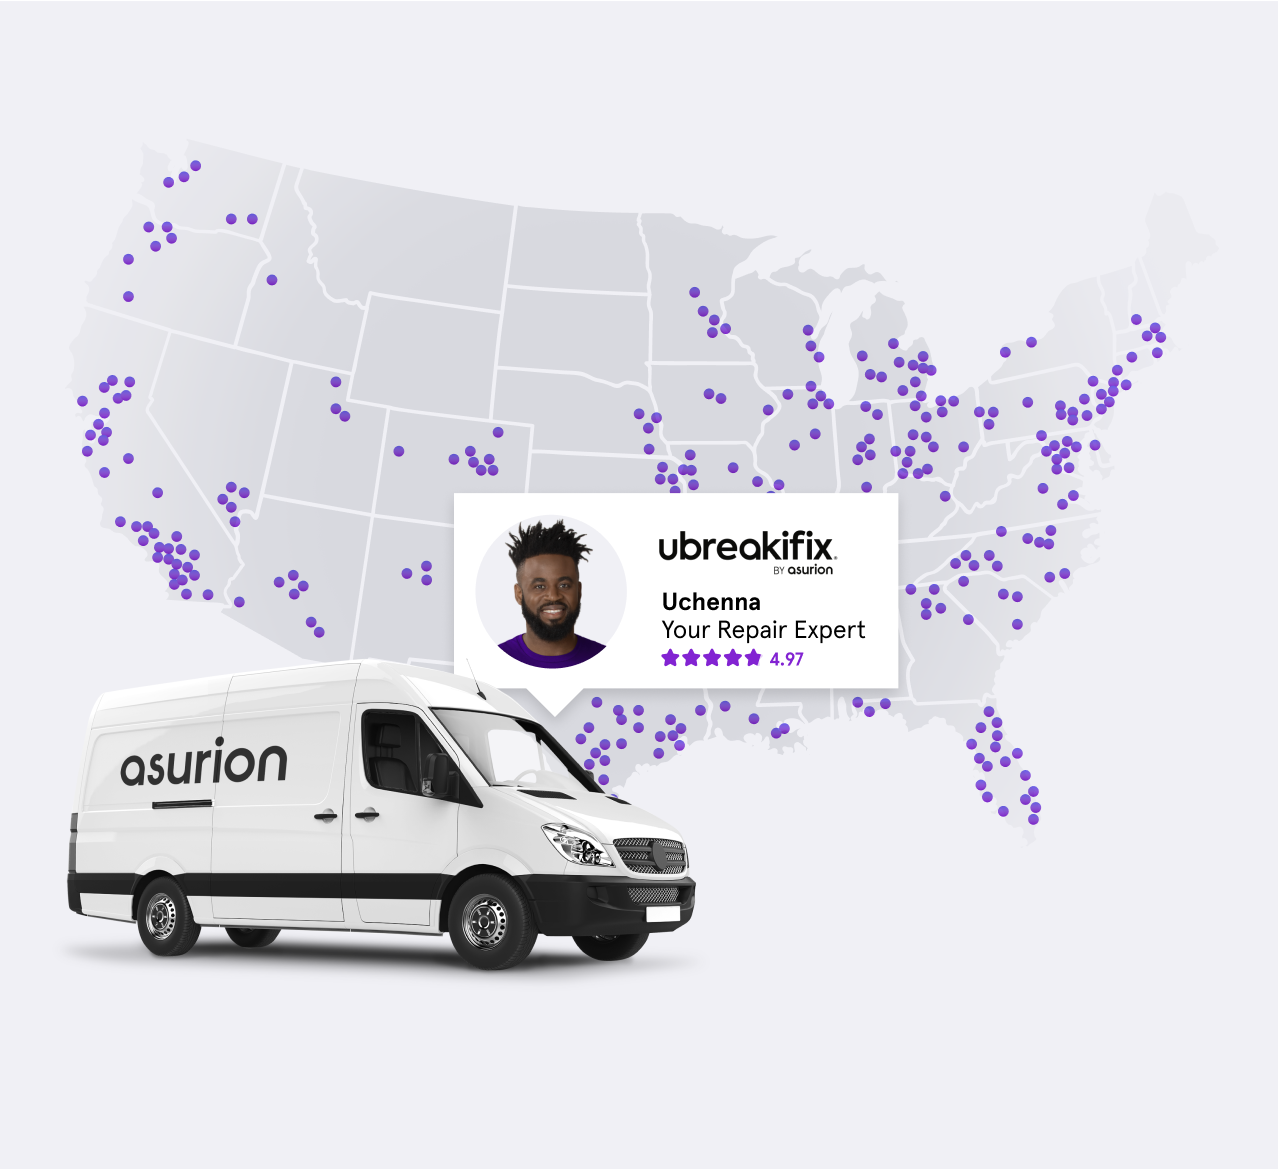 Asurion and uBreakiFix store locations, experts and mobile services with gray background